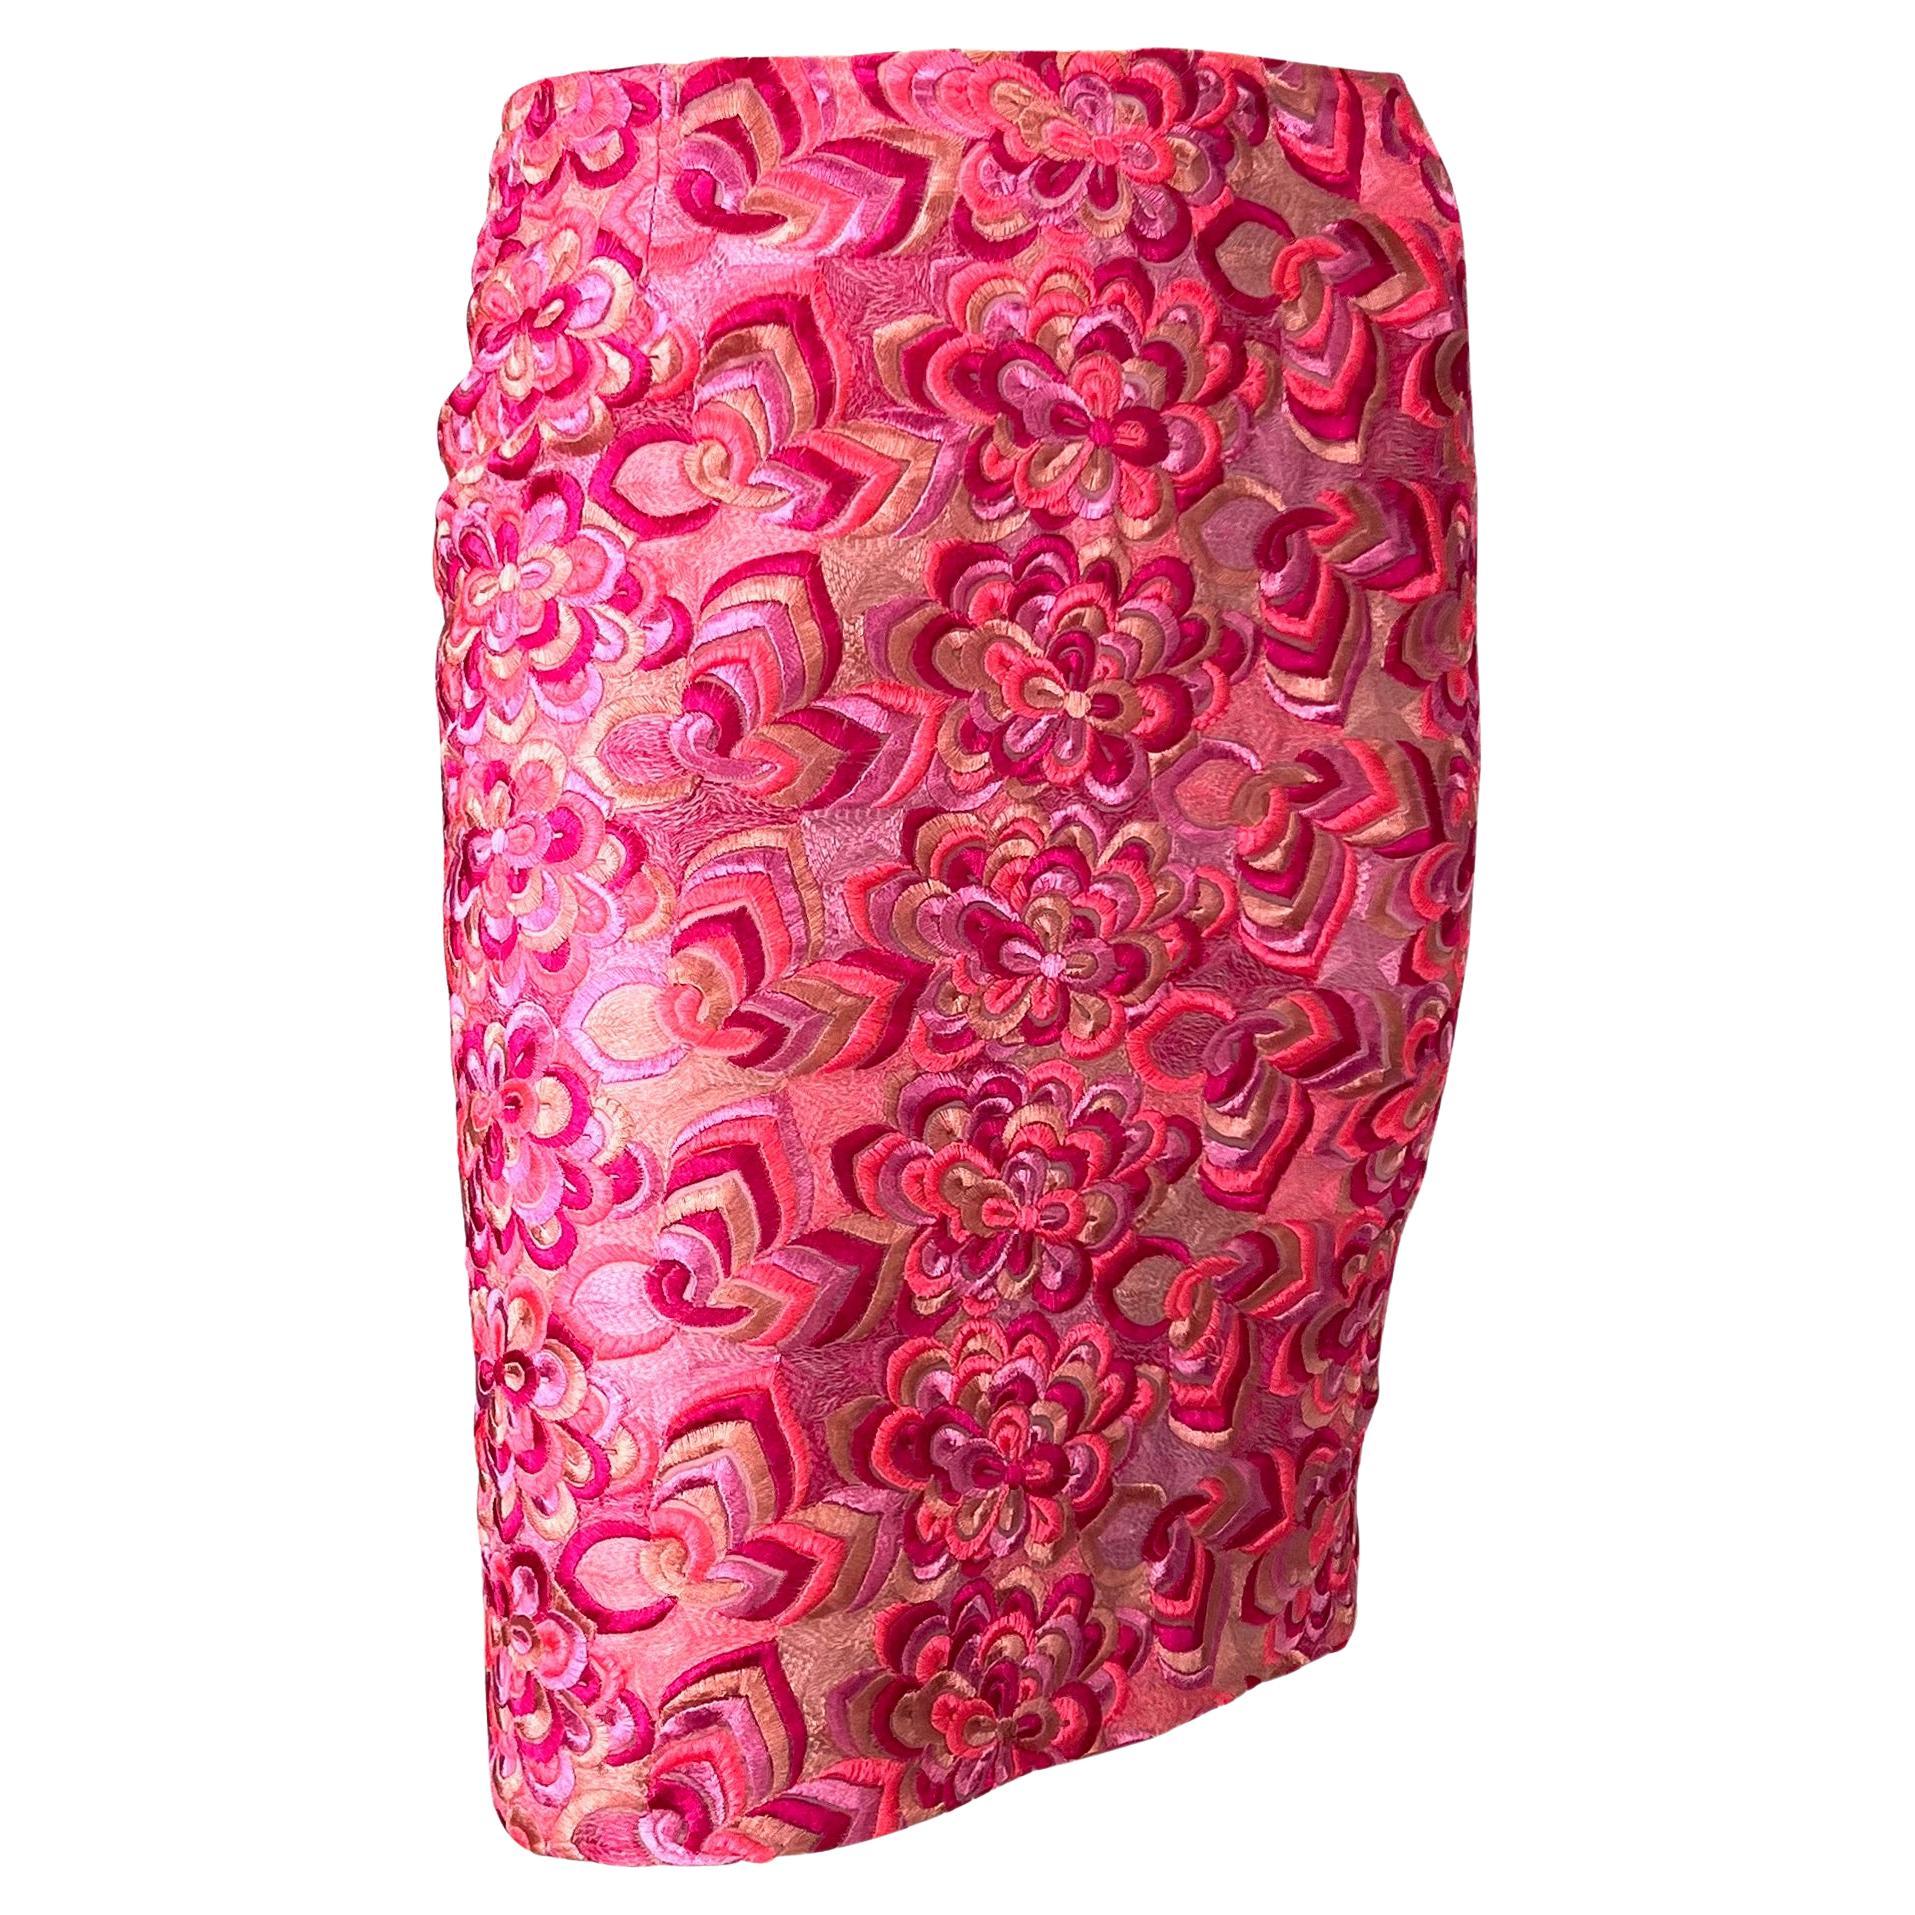 S/S 2000 Gianni Versace by Donatella Neon Pink Floral Embroidered Skirt For Sale 2